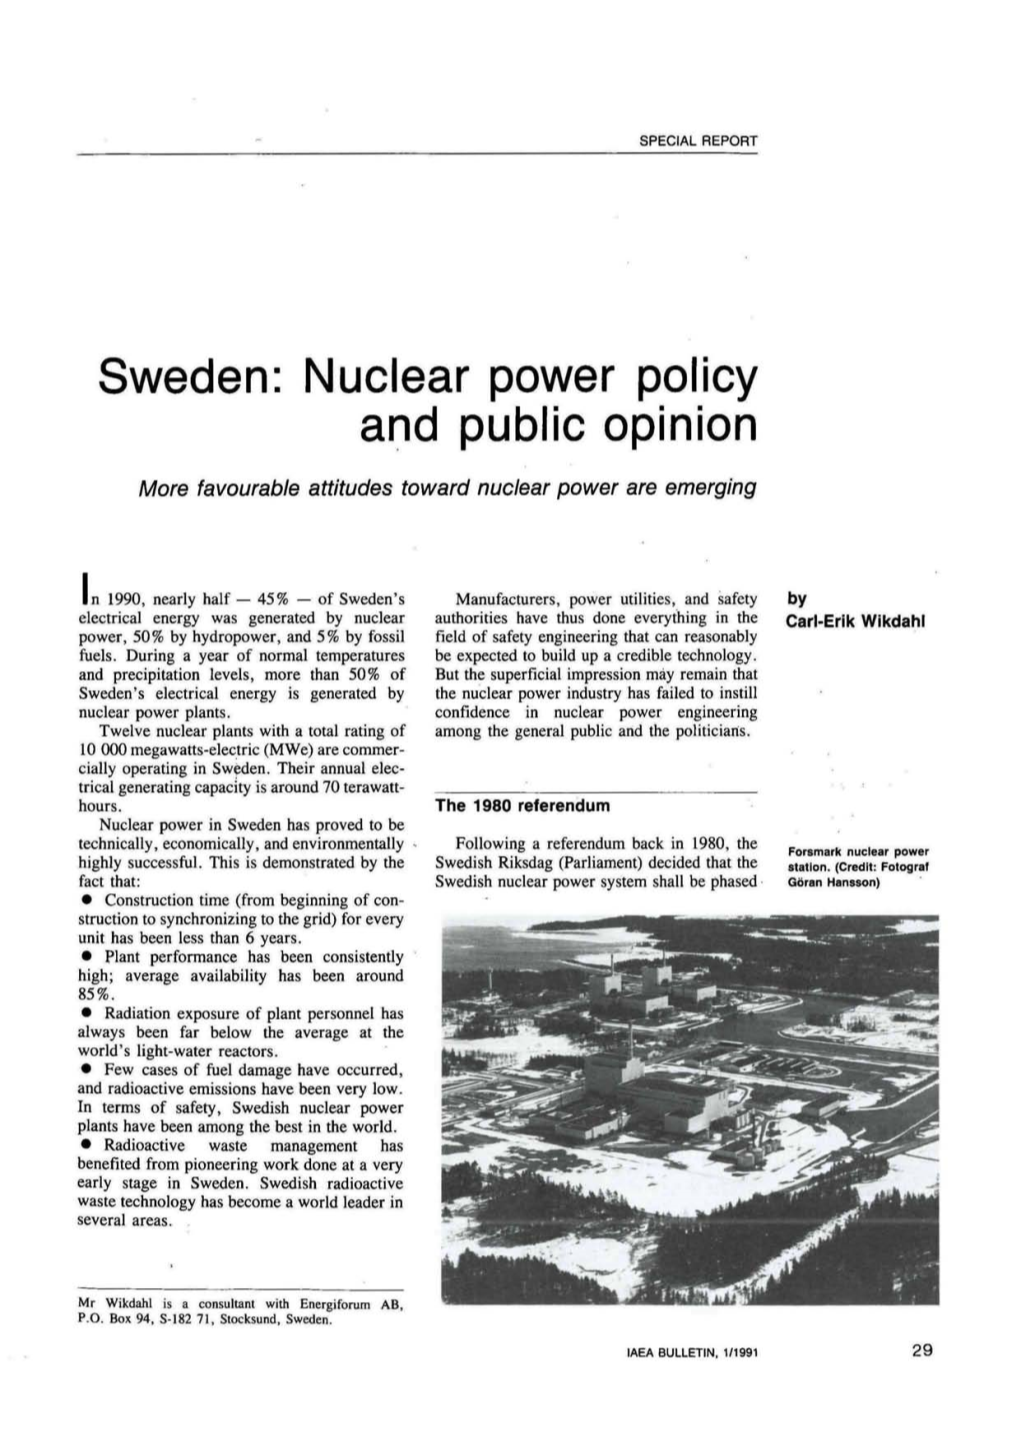 Sweden: Nuclear Power Policy and Public Opinion